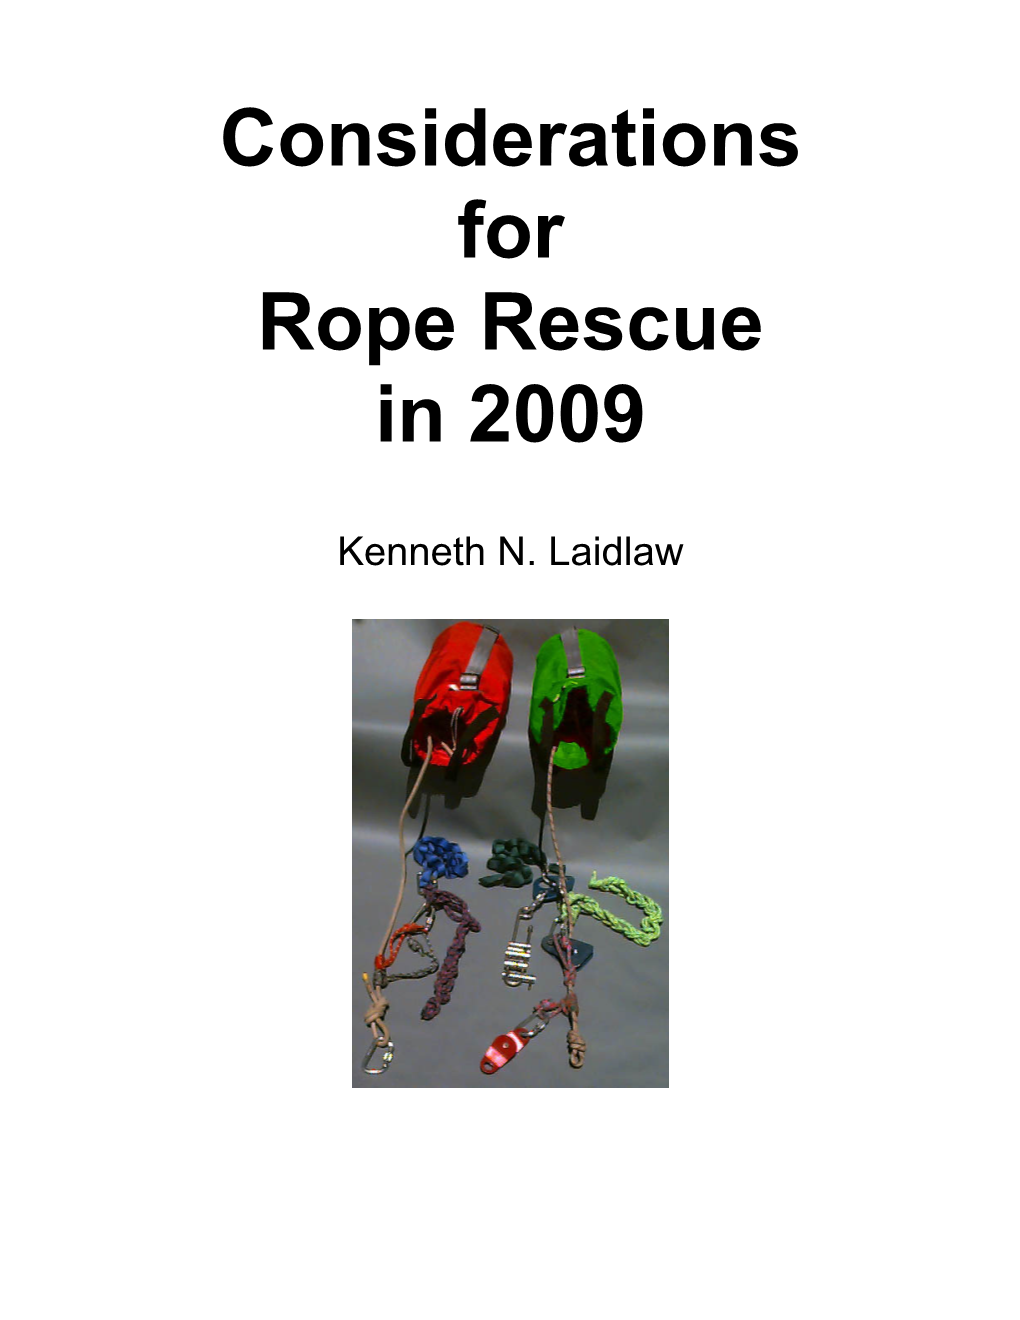 Considerations for Rope Rescue in 2009